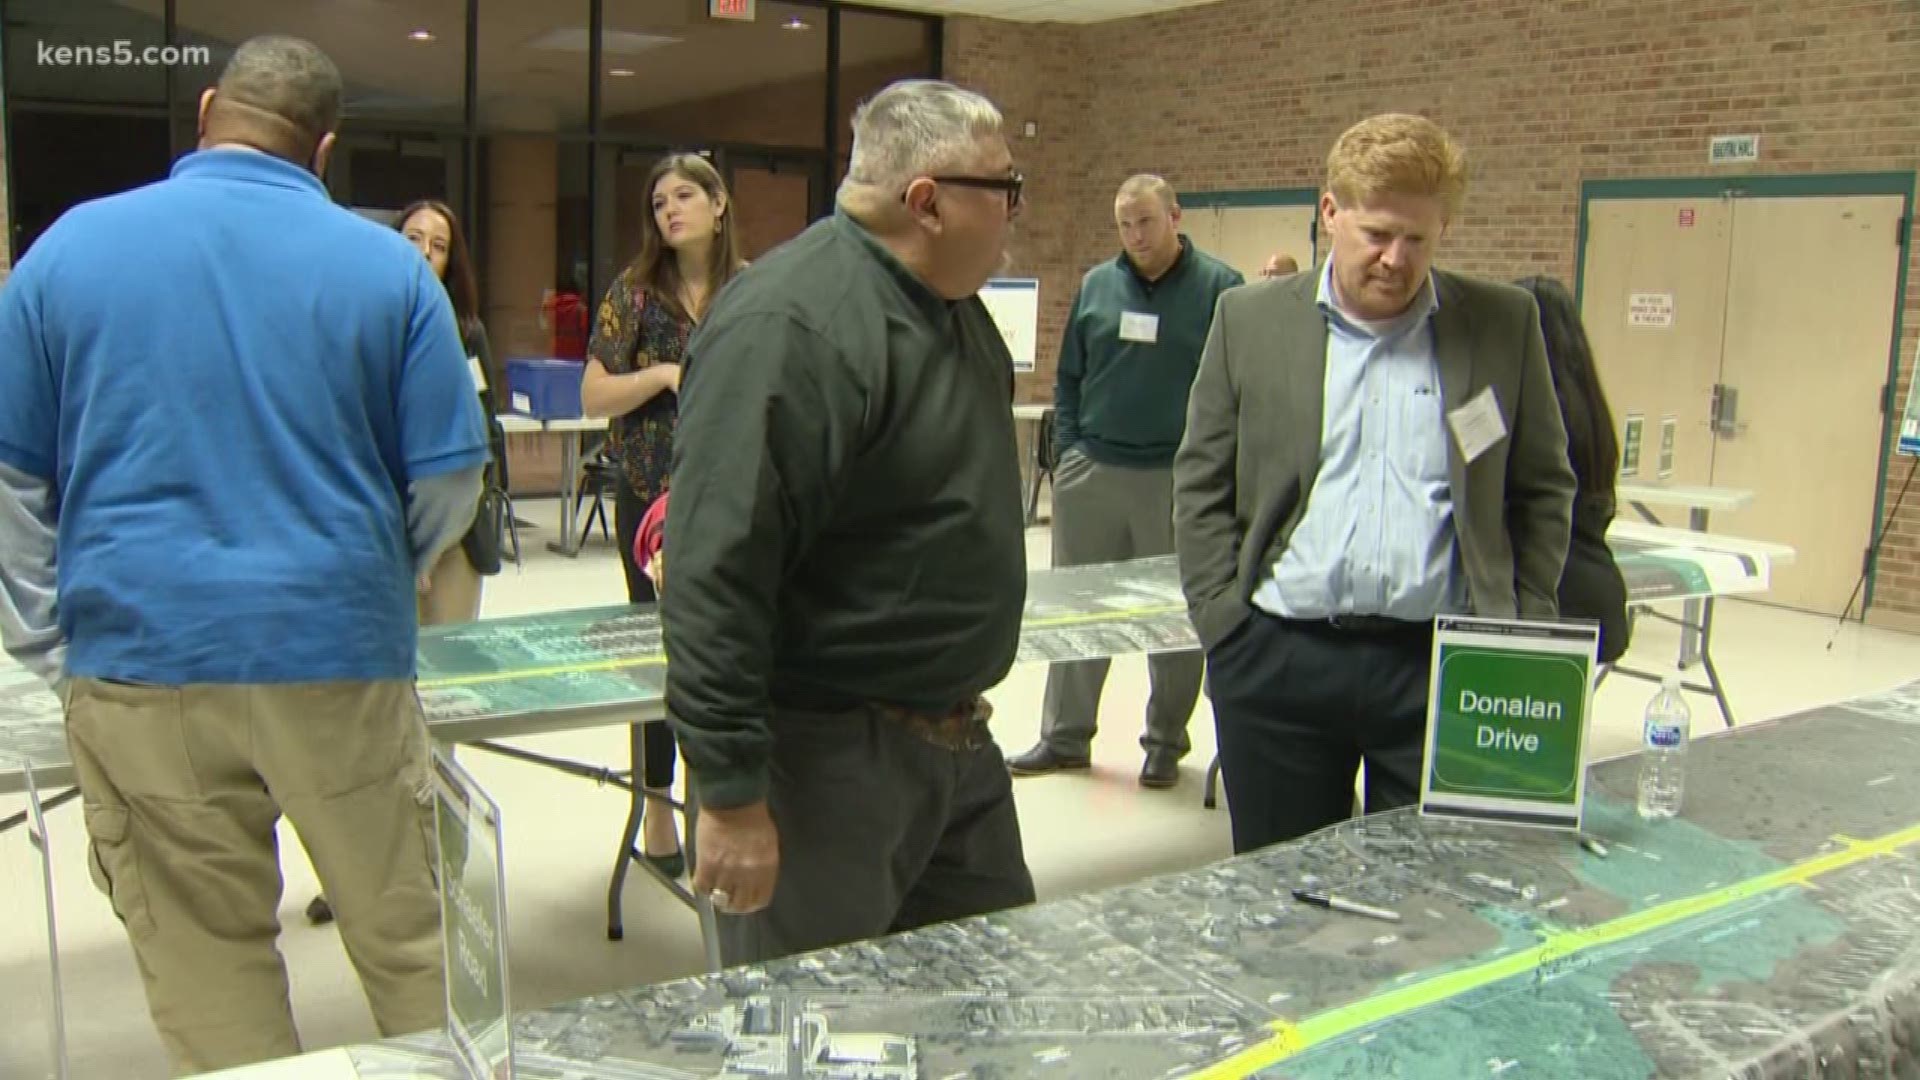 TxDOT held a public hearing about the project Tuesday night. The project would improve FM 1516 from I-10 East to FM 78.